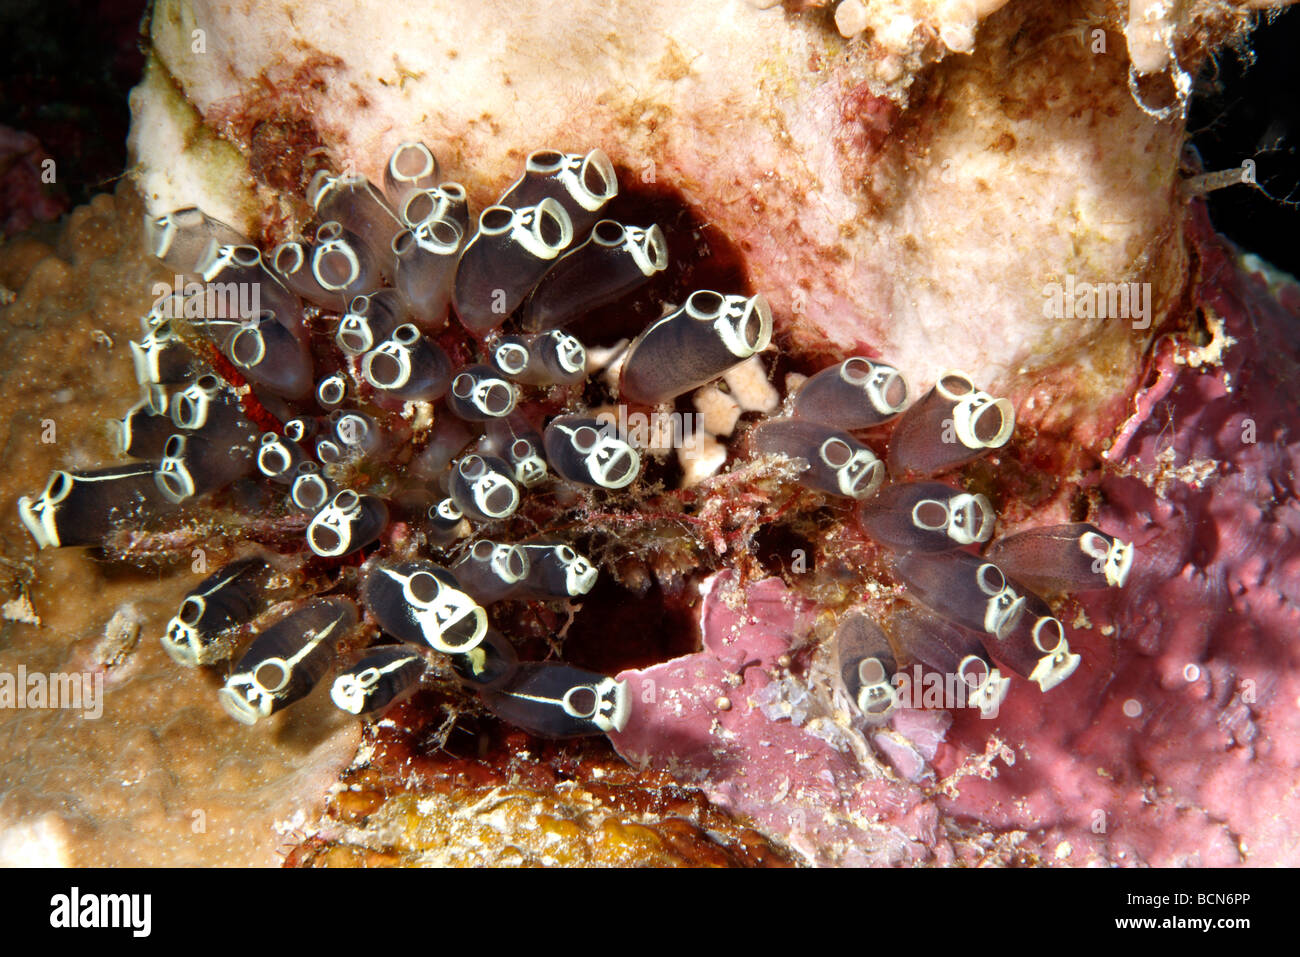 Colony of ascidians or sea squirts, Clavelina robusta Stock Photo